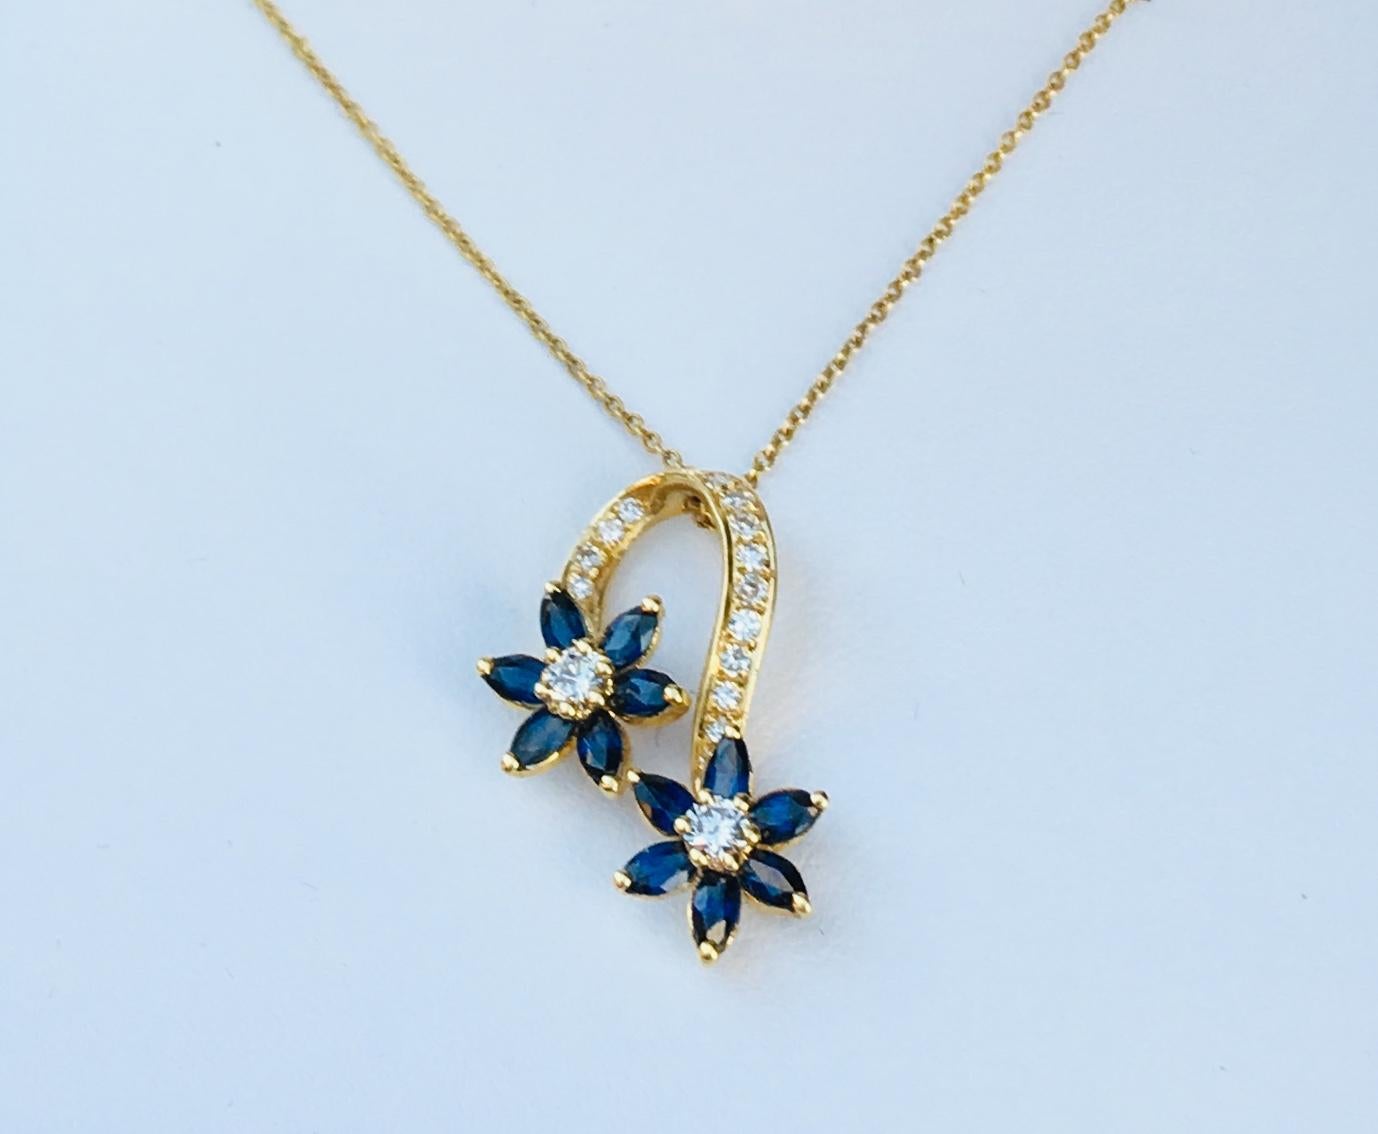 Elegant and stylized estate 18 karat yellow gold pendant on chain features two spinning flowers with prong set round brilliant diamond centers and 6 prong set, marquise cut blue sapphire petals.  Flowers are connected by a graceful 18 karat yellow